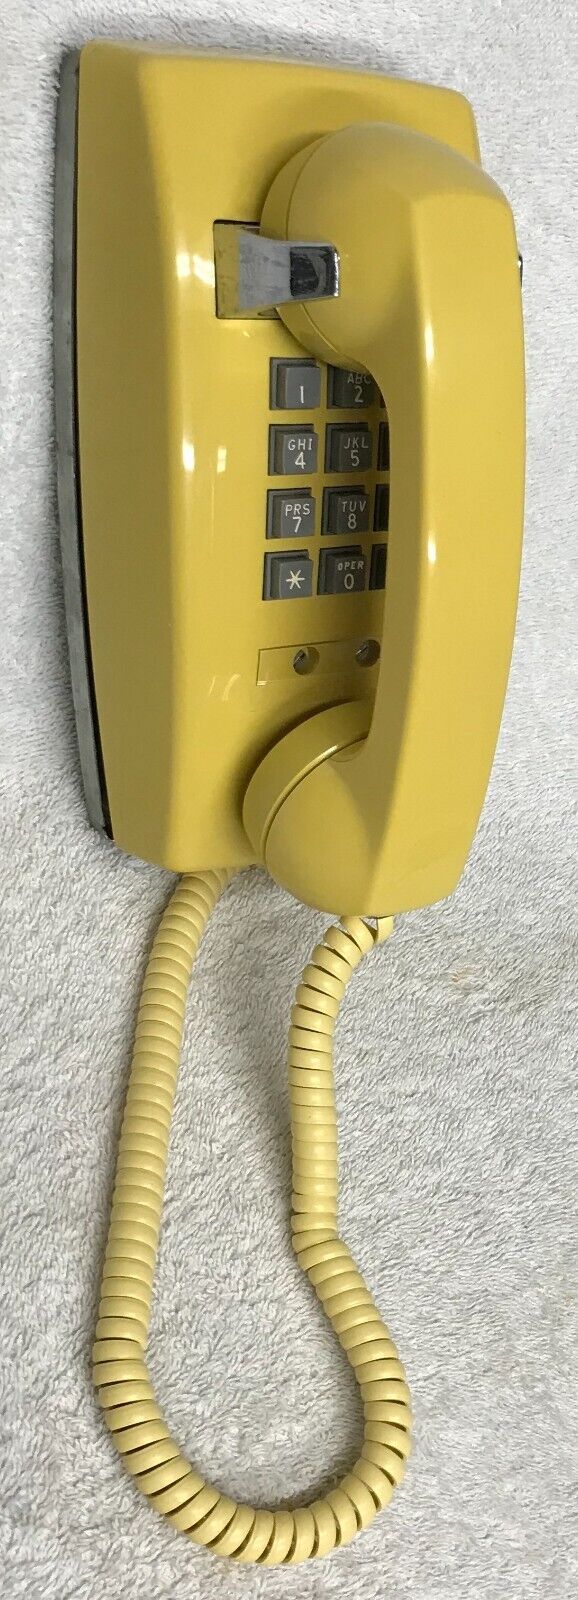 Vintage 1970s WESTERN ELECTRIC 2554B2P YELLOW Push Button Touch Dial Wall Phone